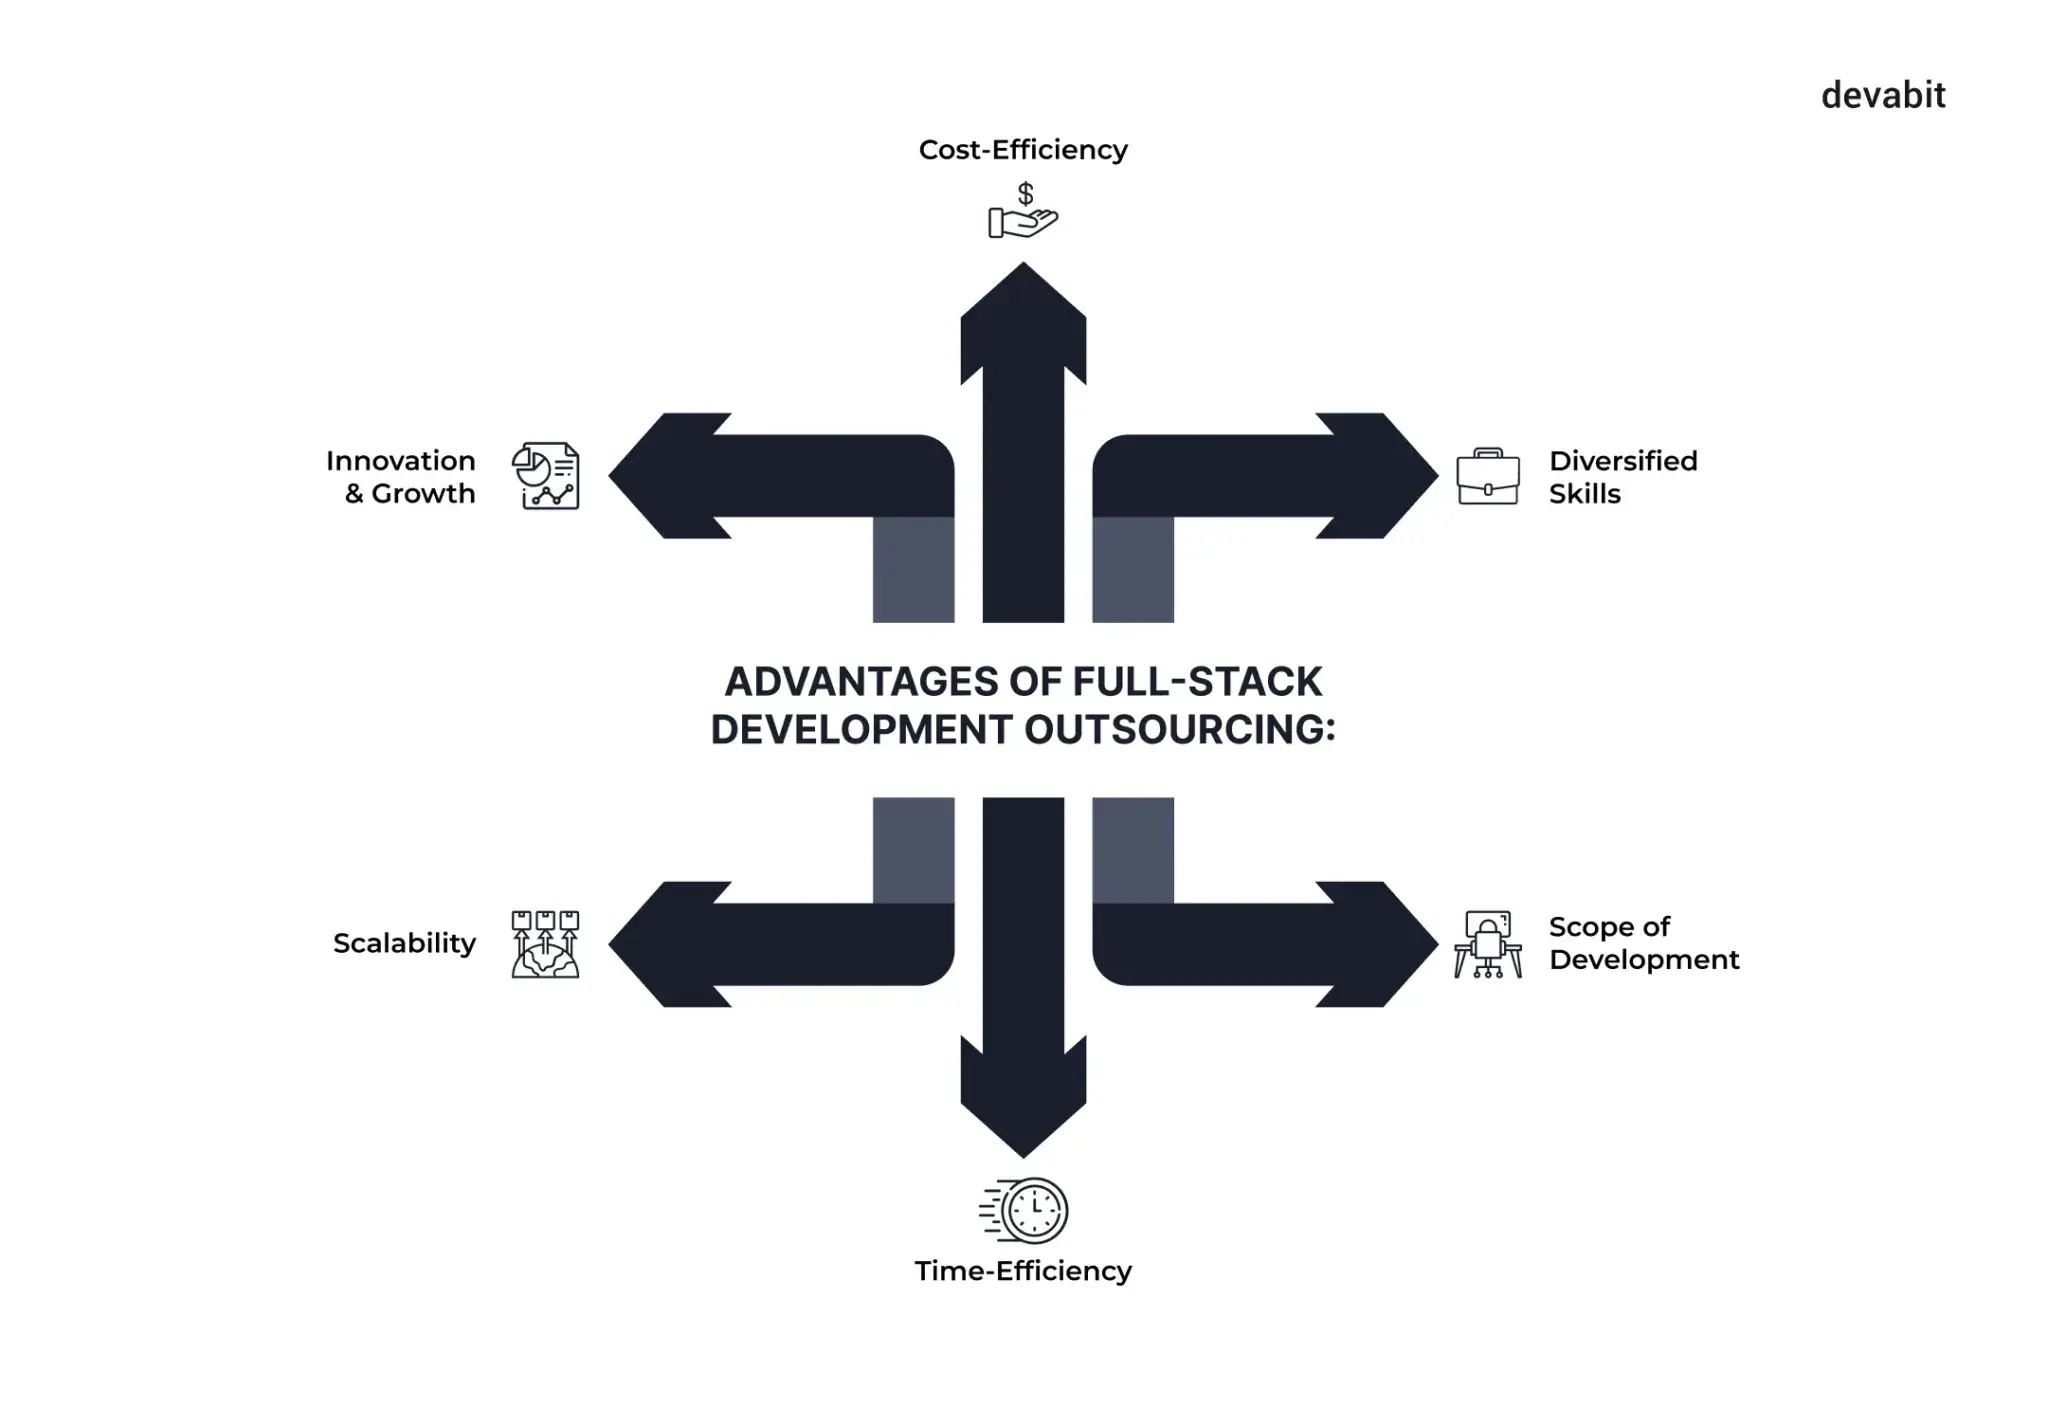 Benefits of full-stack development outsourcing